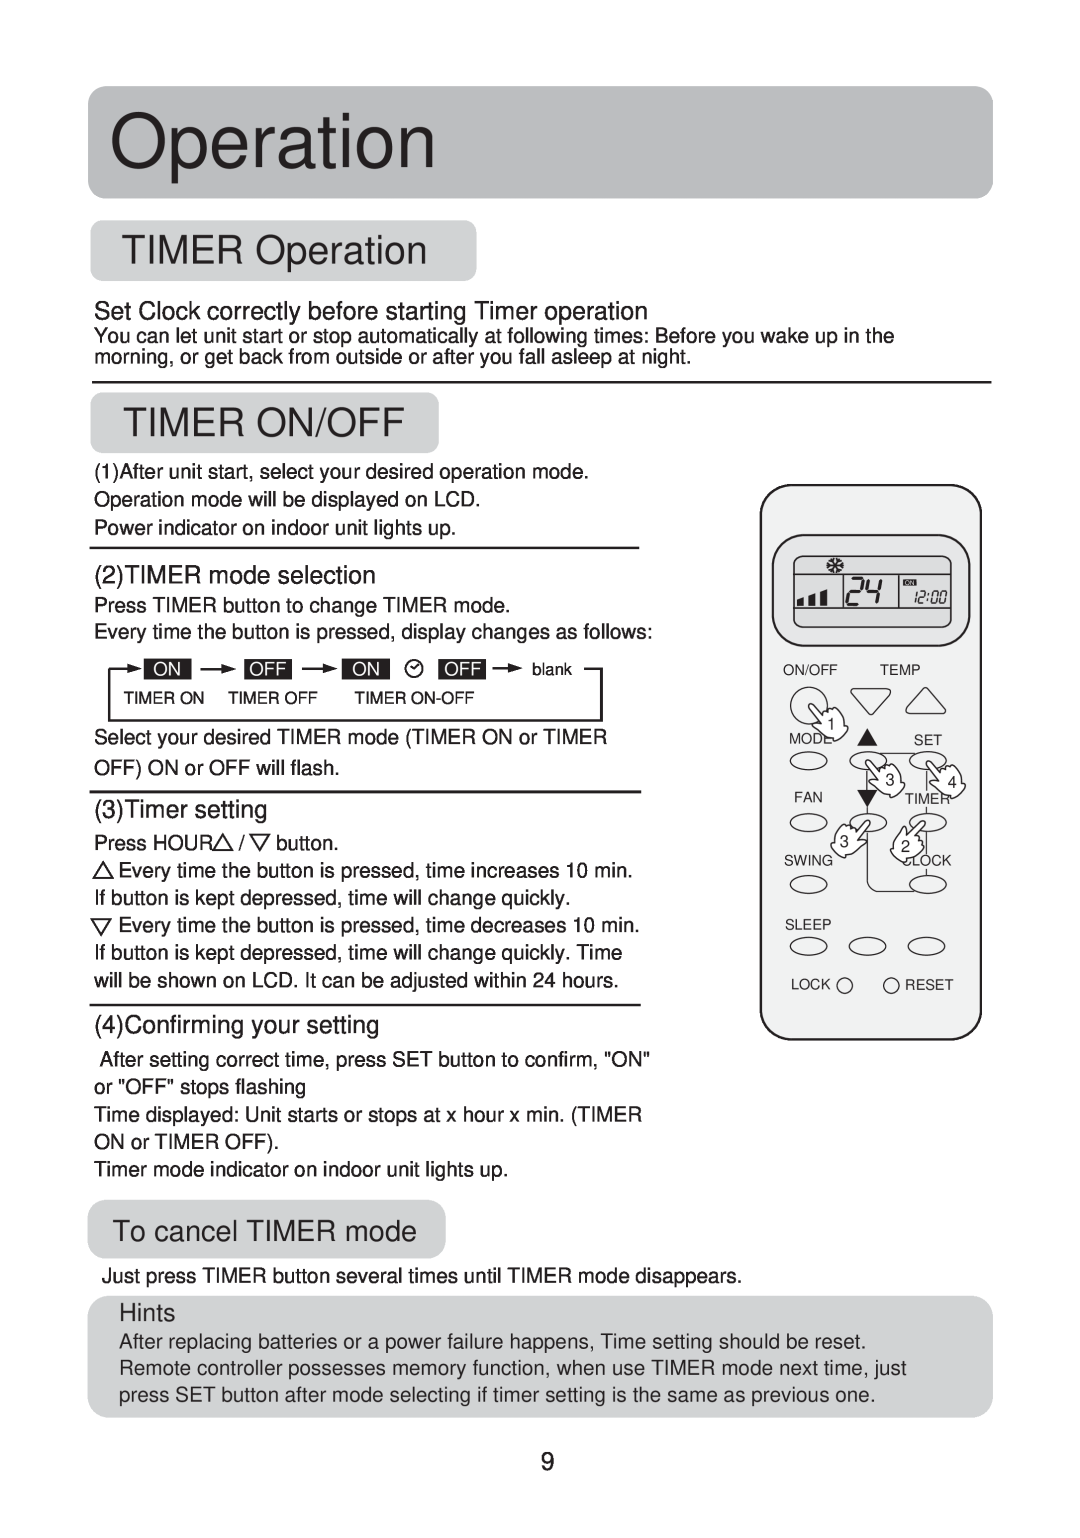 Haier HSU-22LE03 TIMER Operation, Timer On/Off, To cancel TIMER mode, 2TIMER mode selection, 3Timer setting, Hints 